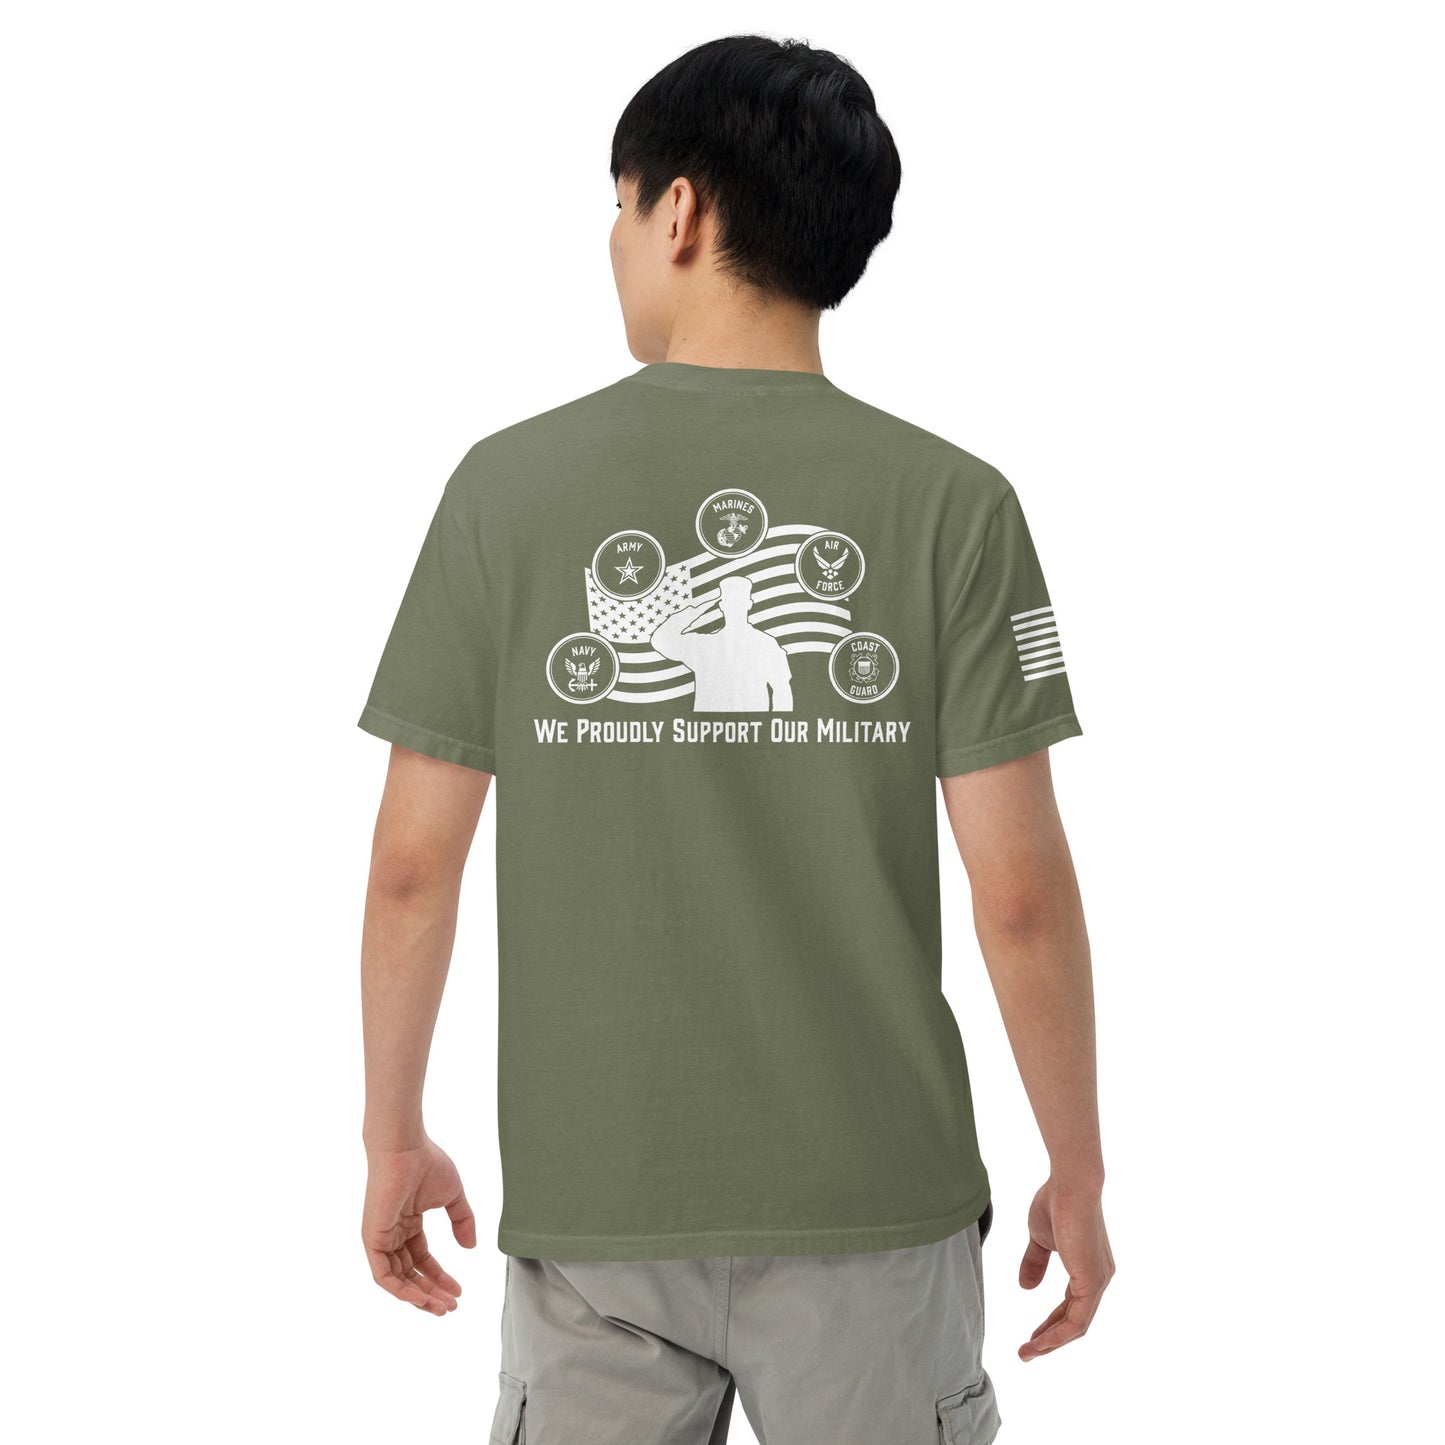 Unisex Military Support T-Shirt